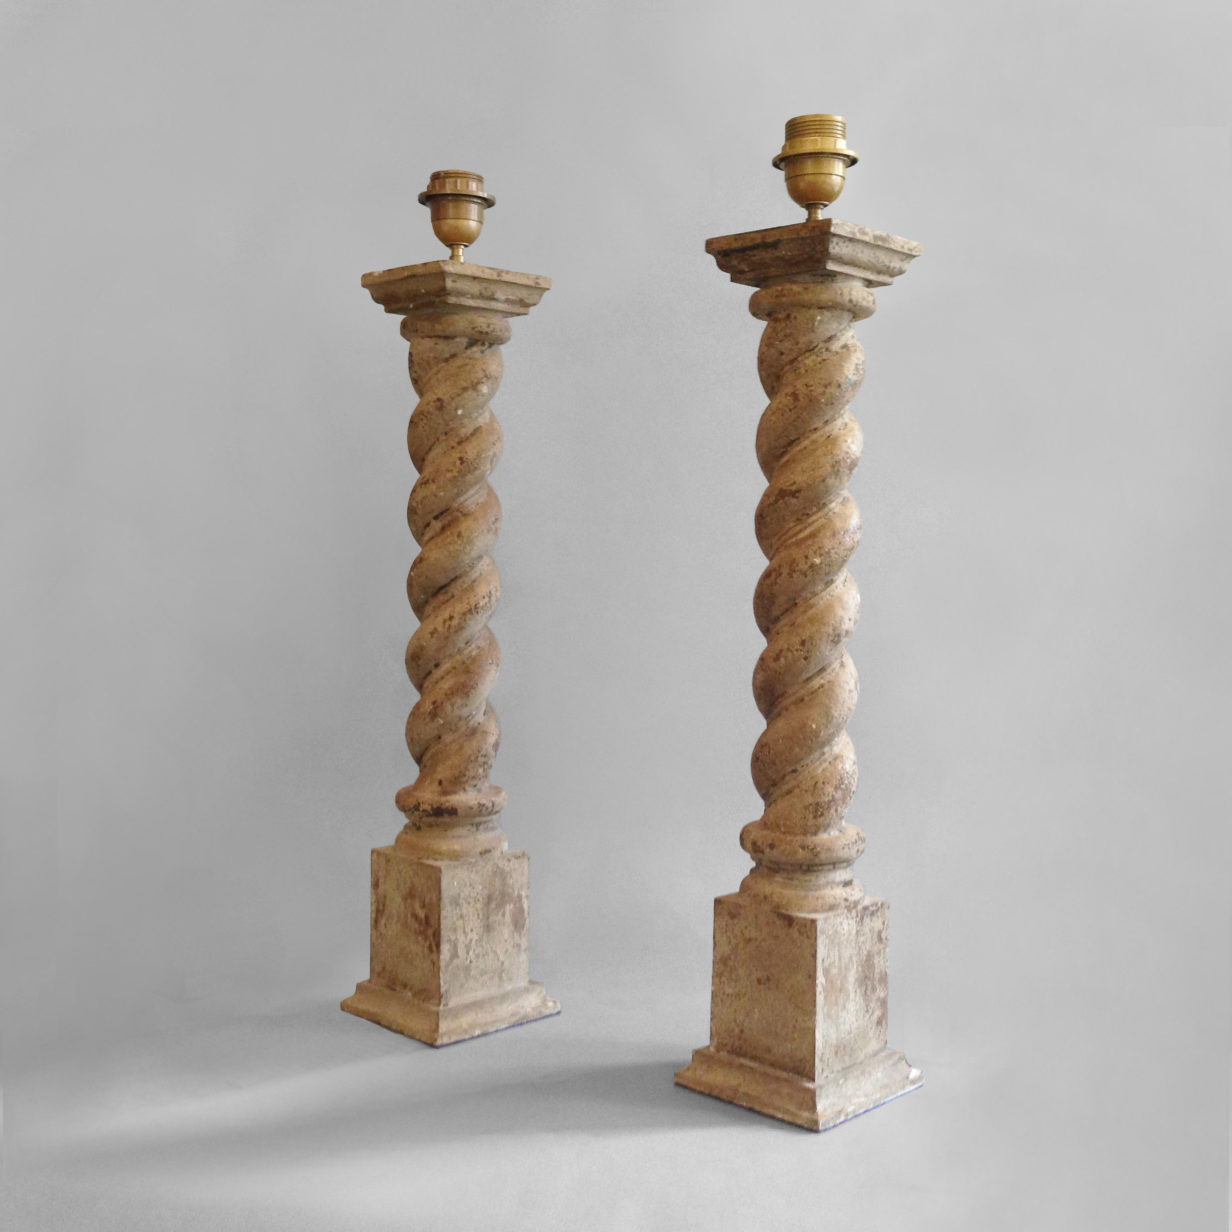 A pair of chenenceau lamp bases